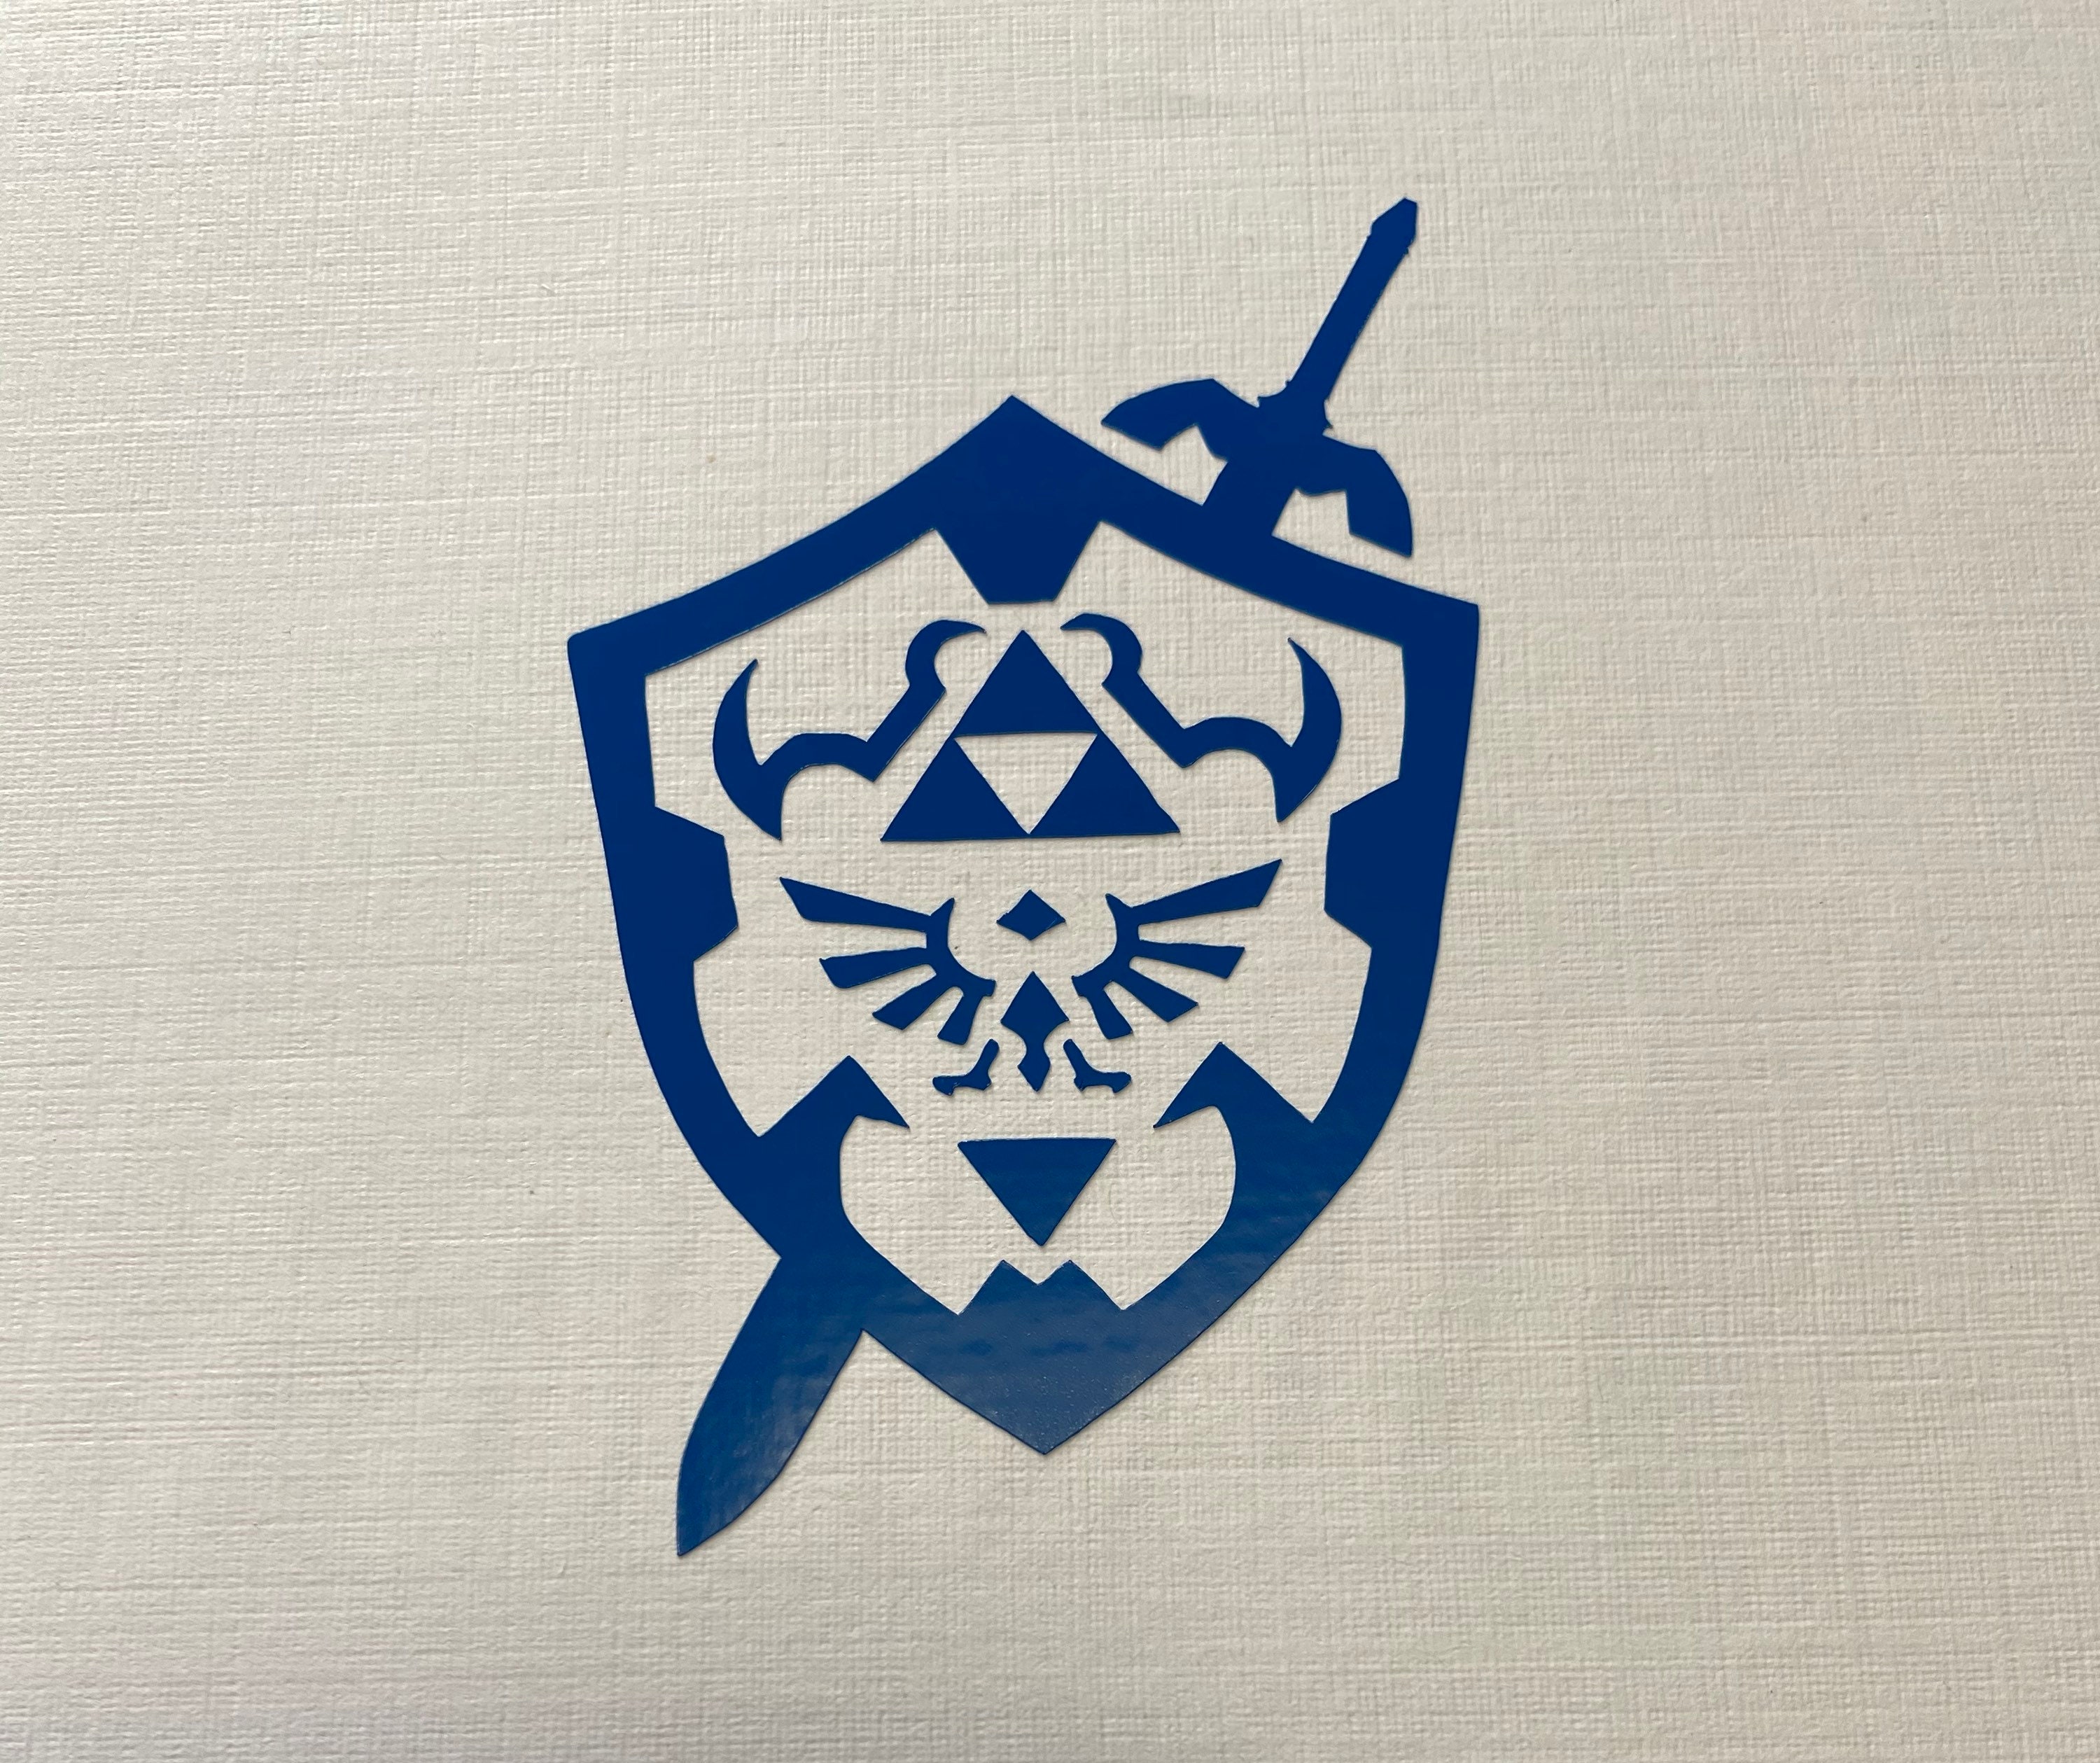 Legend Zelda Tears of Kingdom Party Favor Bags Gift Birthday Party  Decorations Supplies Link 